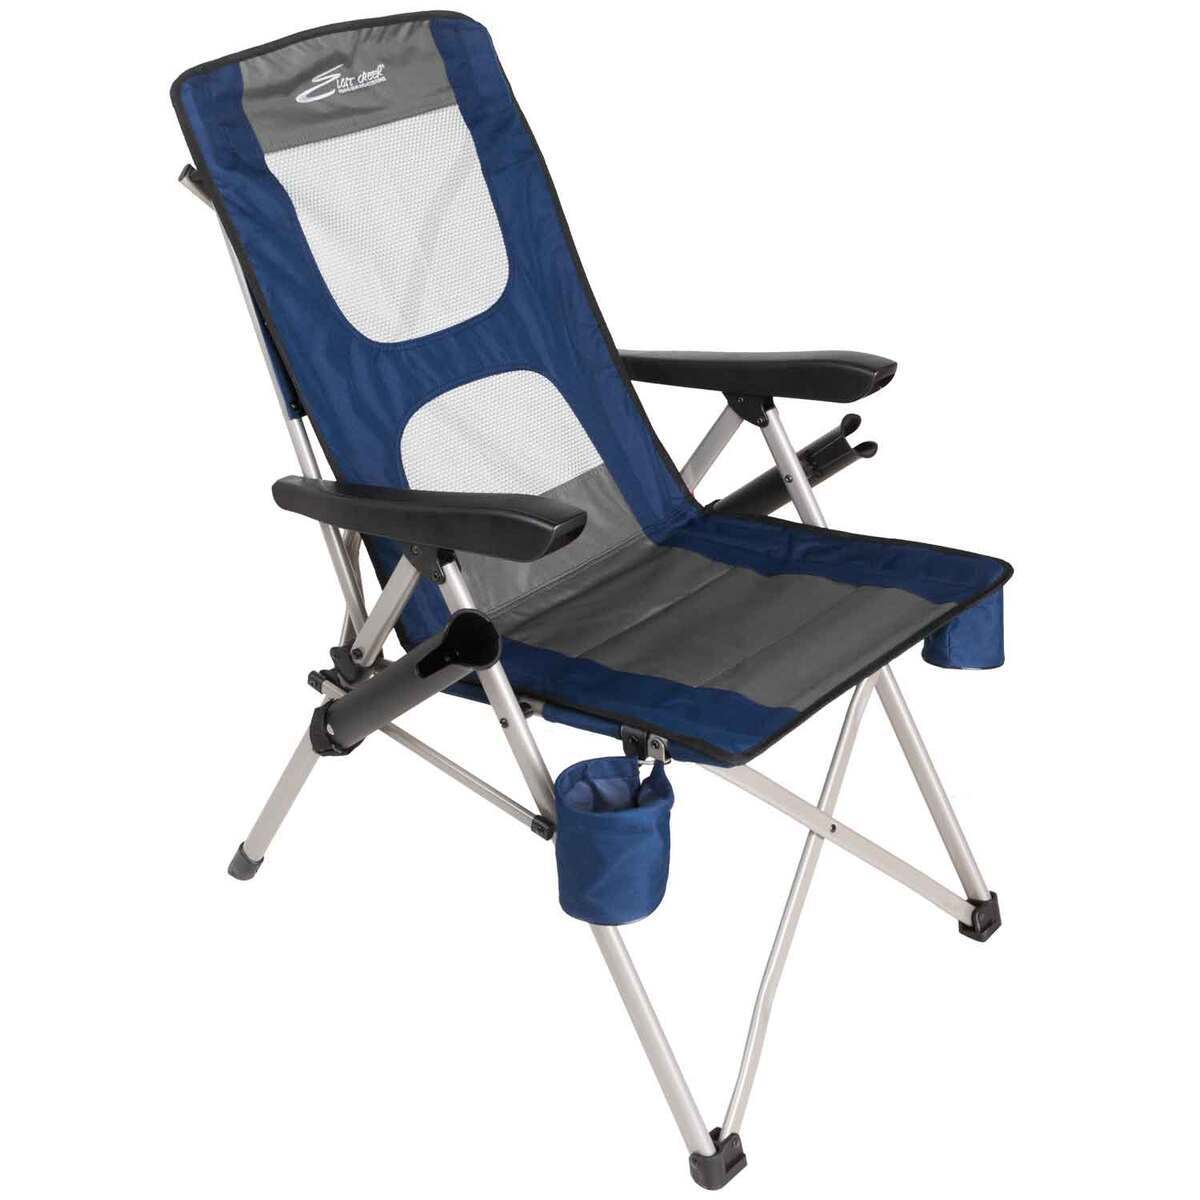 Chairs & Bed Chairs, Anglers' Equipment